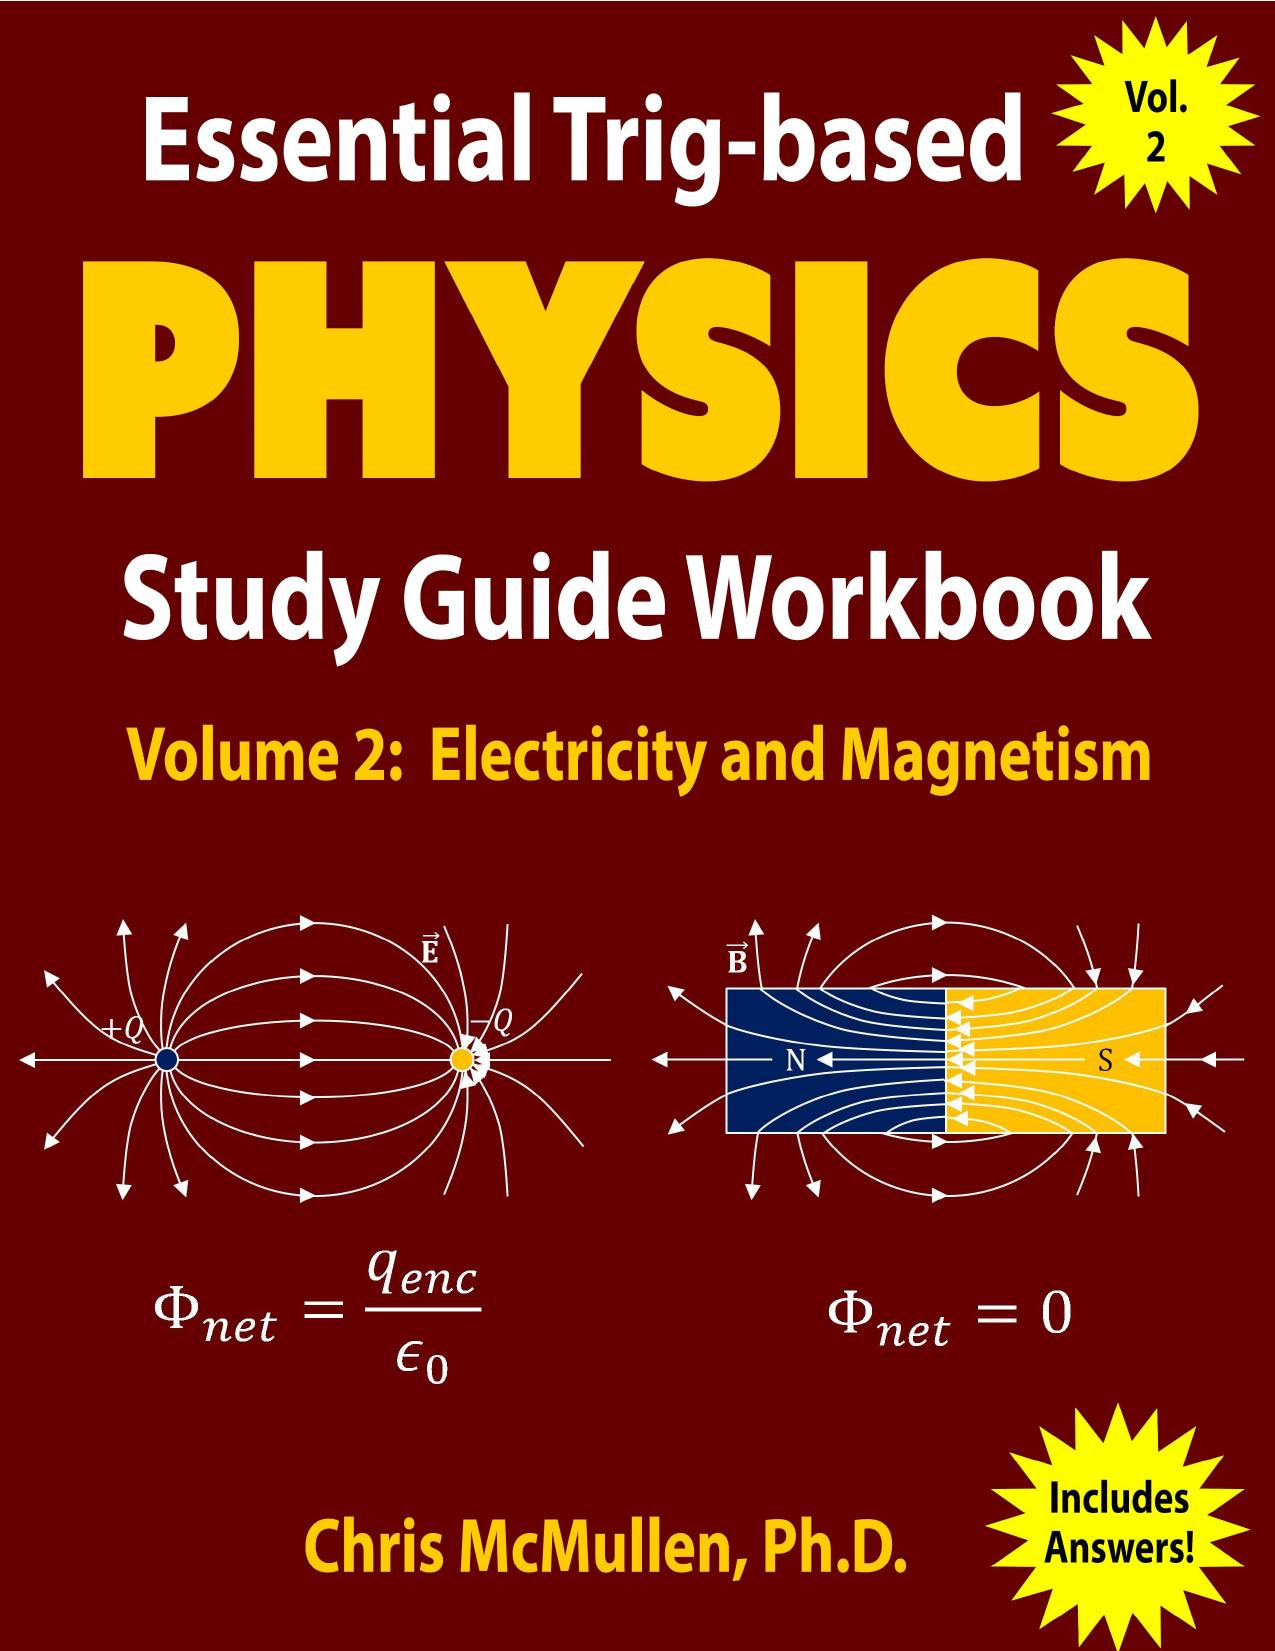 Essential Trig-based Physics Study Guide Workbook  Electricity and Magnetism (2017)